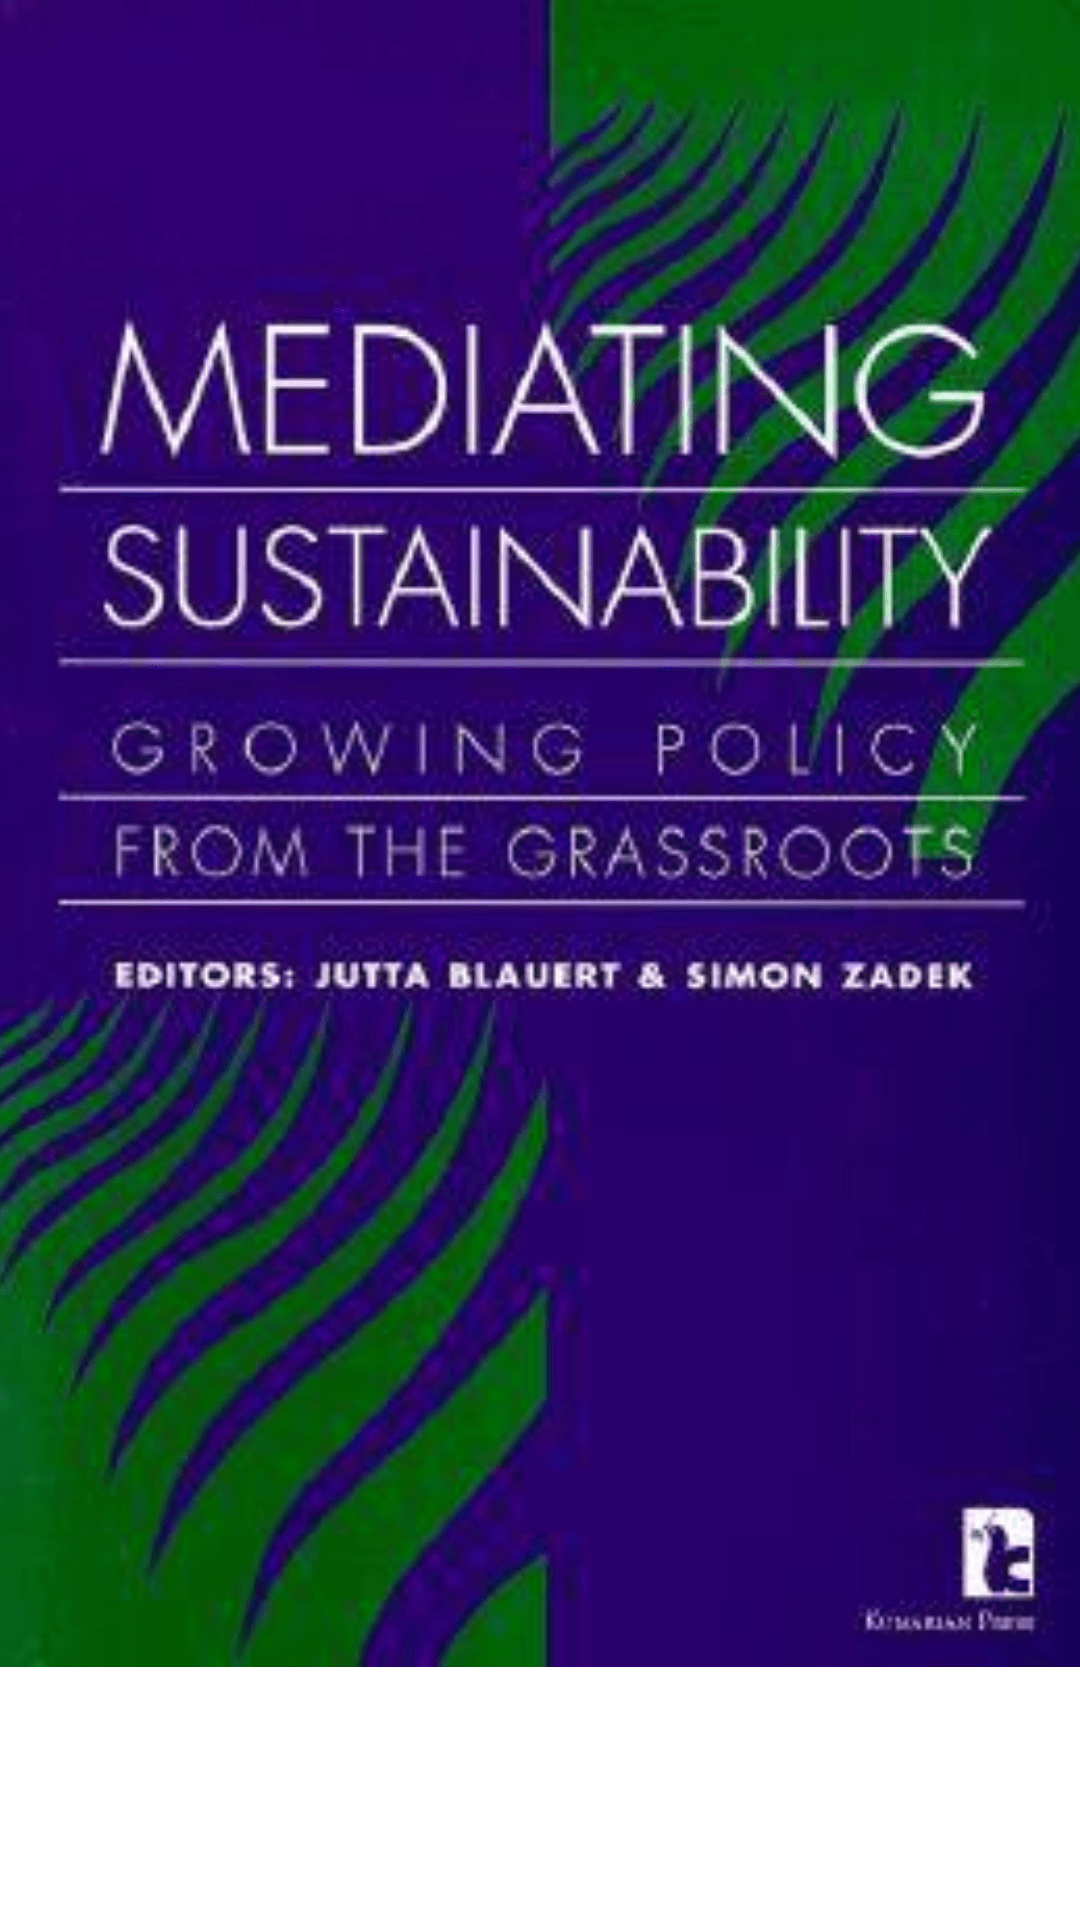 Mediating Sustainability: Growing Policy from the Grassroots